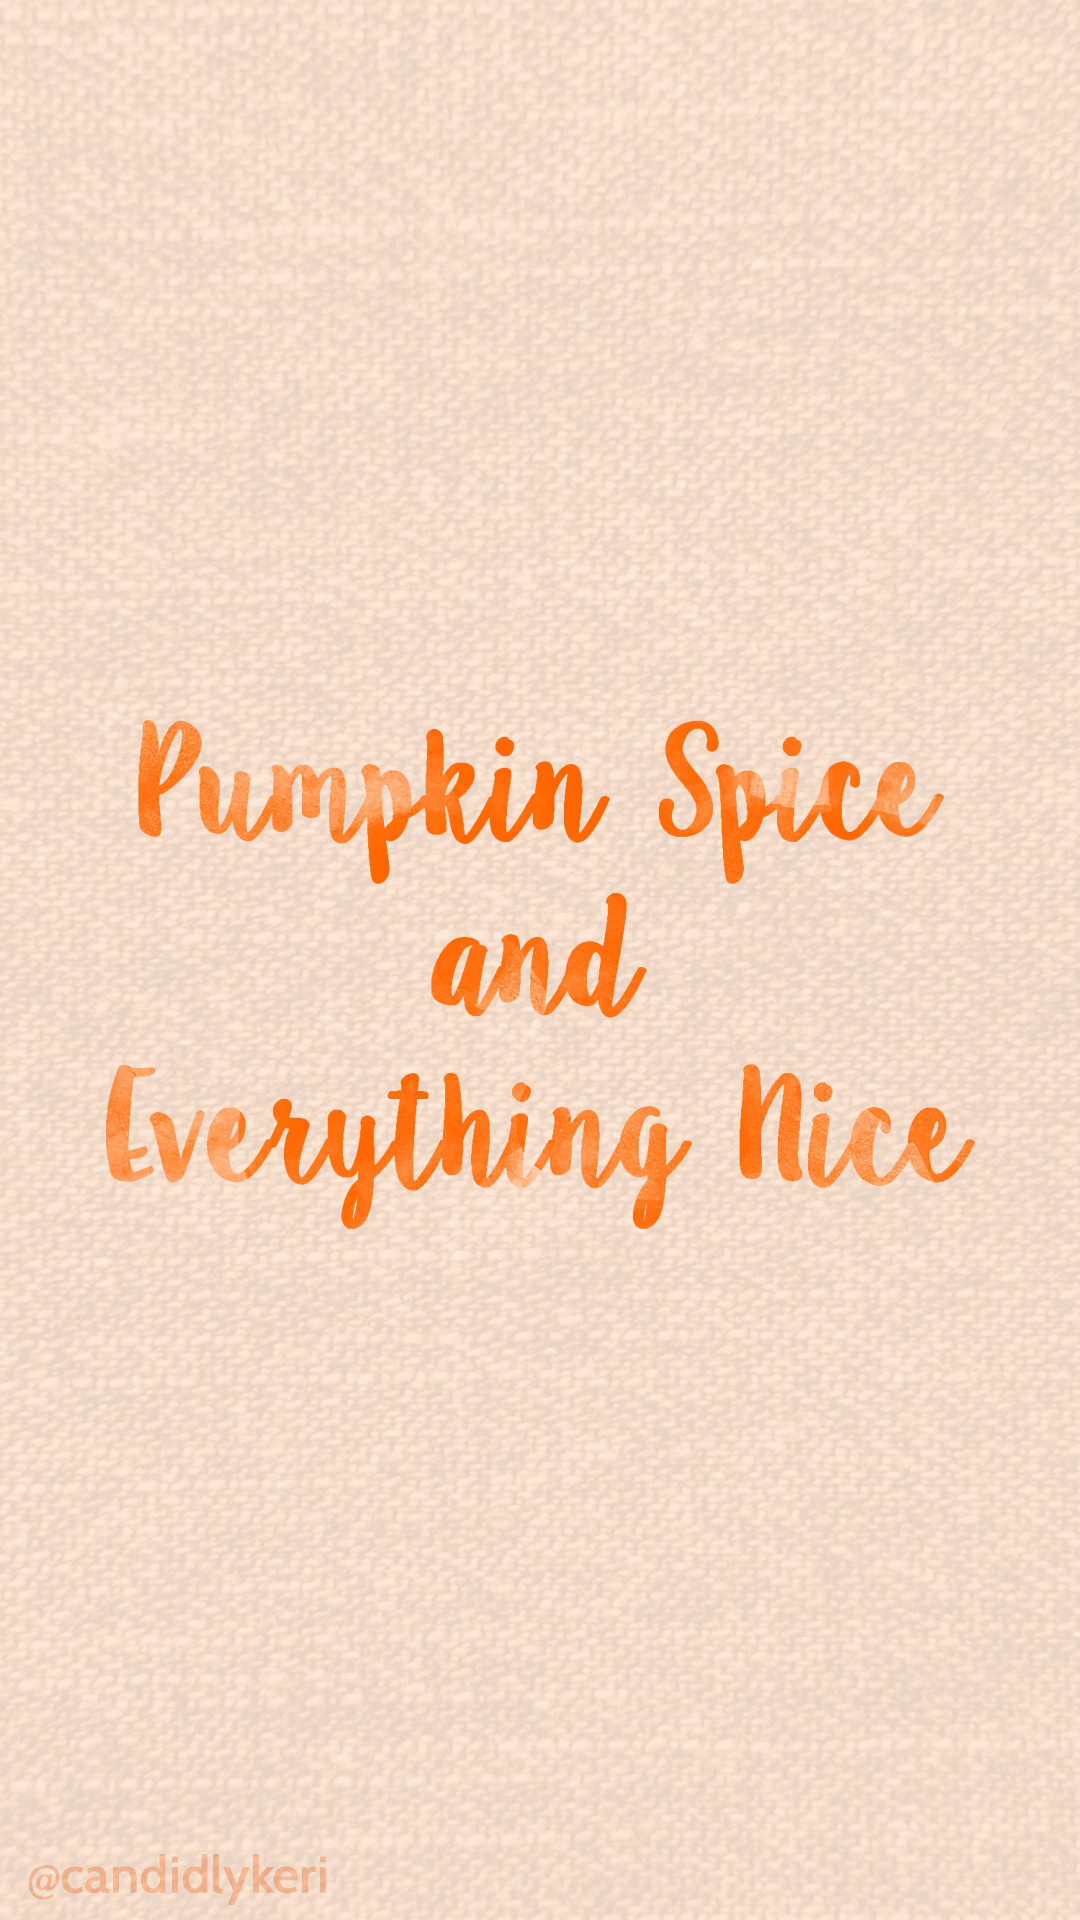 1080x1920 Pumpkin Spice and Everything nice canvas background cute orange watercolor  2016 wallpaper you can download for